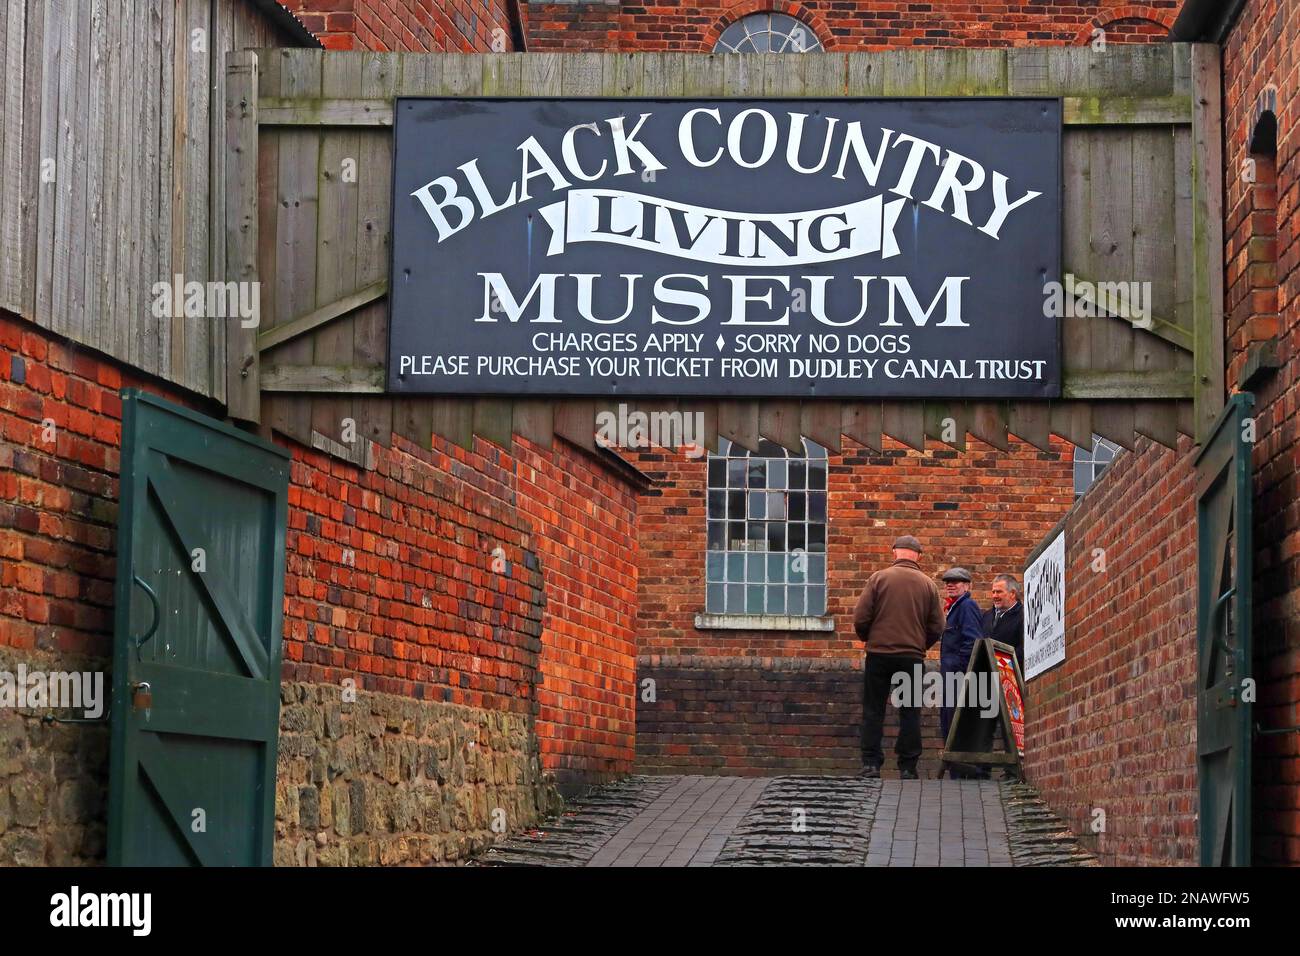 Eingangstor zum Black Country Living Museum, Dudley Canalside, Canal Trust, West Midland, England, UK, DY1 4SB Stockfoto